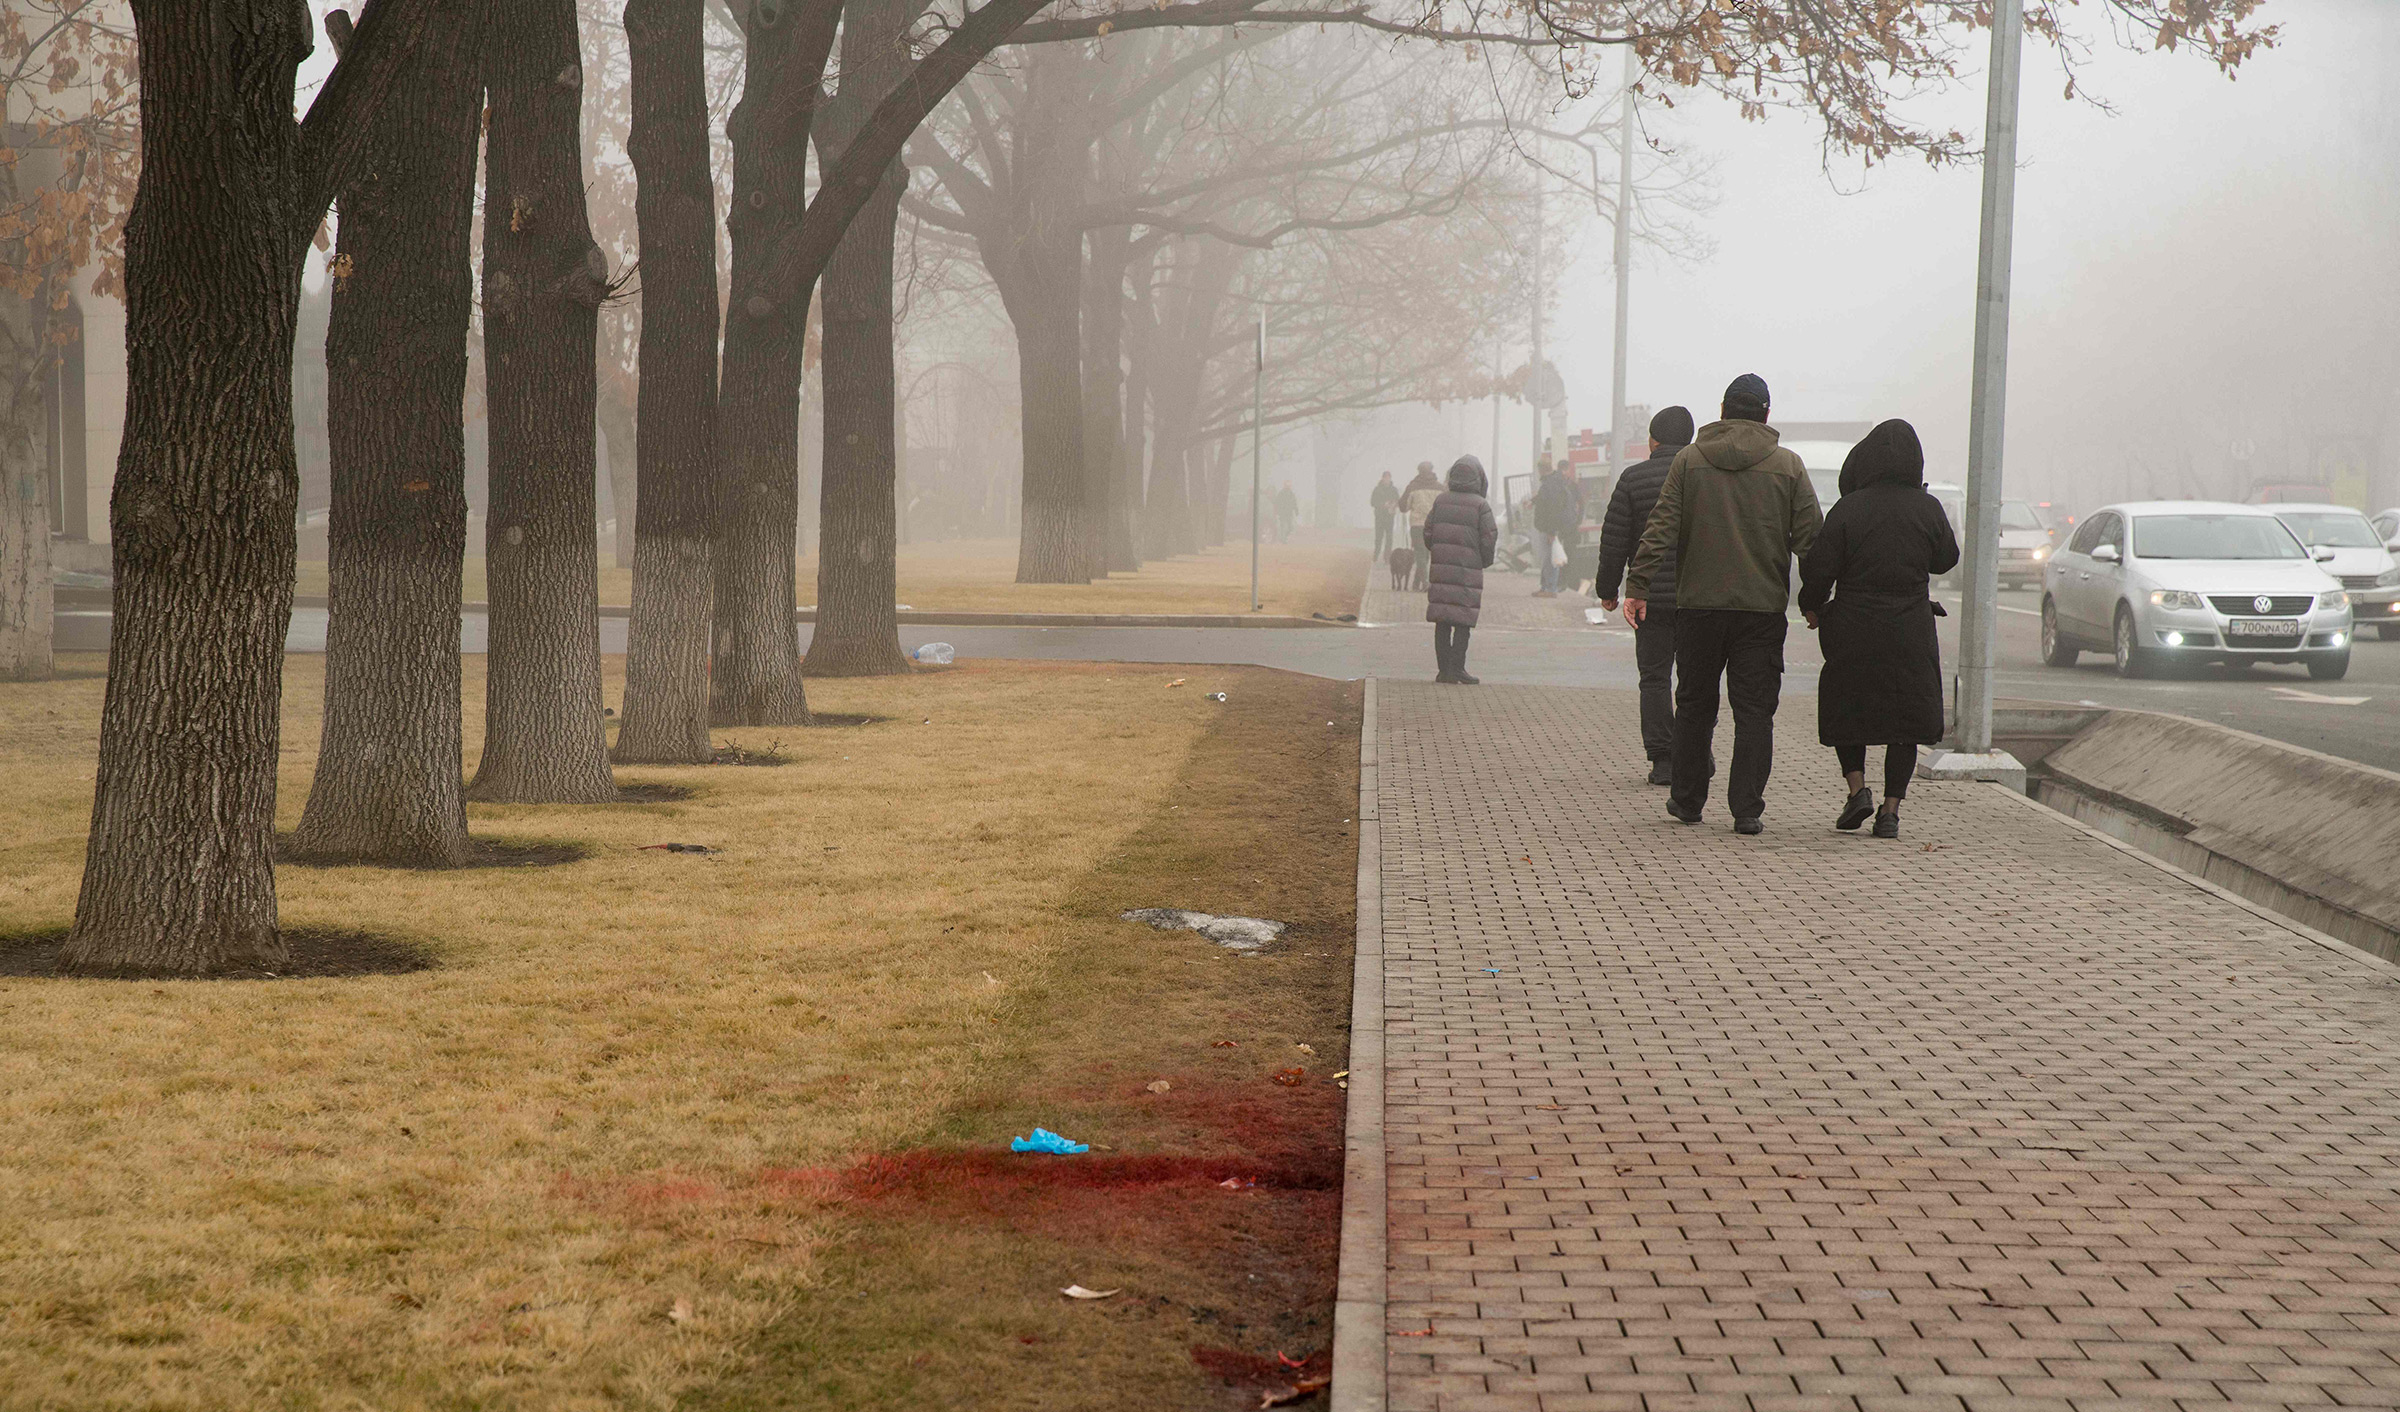 People walk past blood on a curbside lawn after violence that erupted following protests over hikes in fuel prices, in Almaty, Kazakhstan on Jan. 6, 2022. (Alexander Bogdanov— AFP/Getty Images)